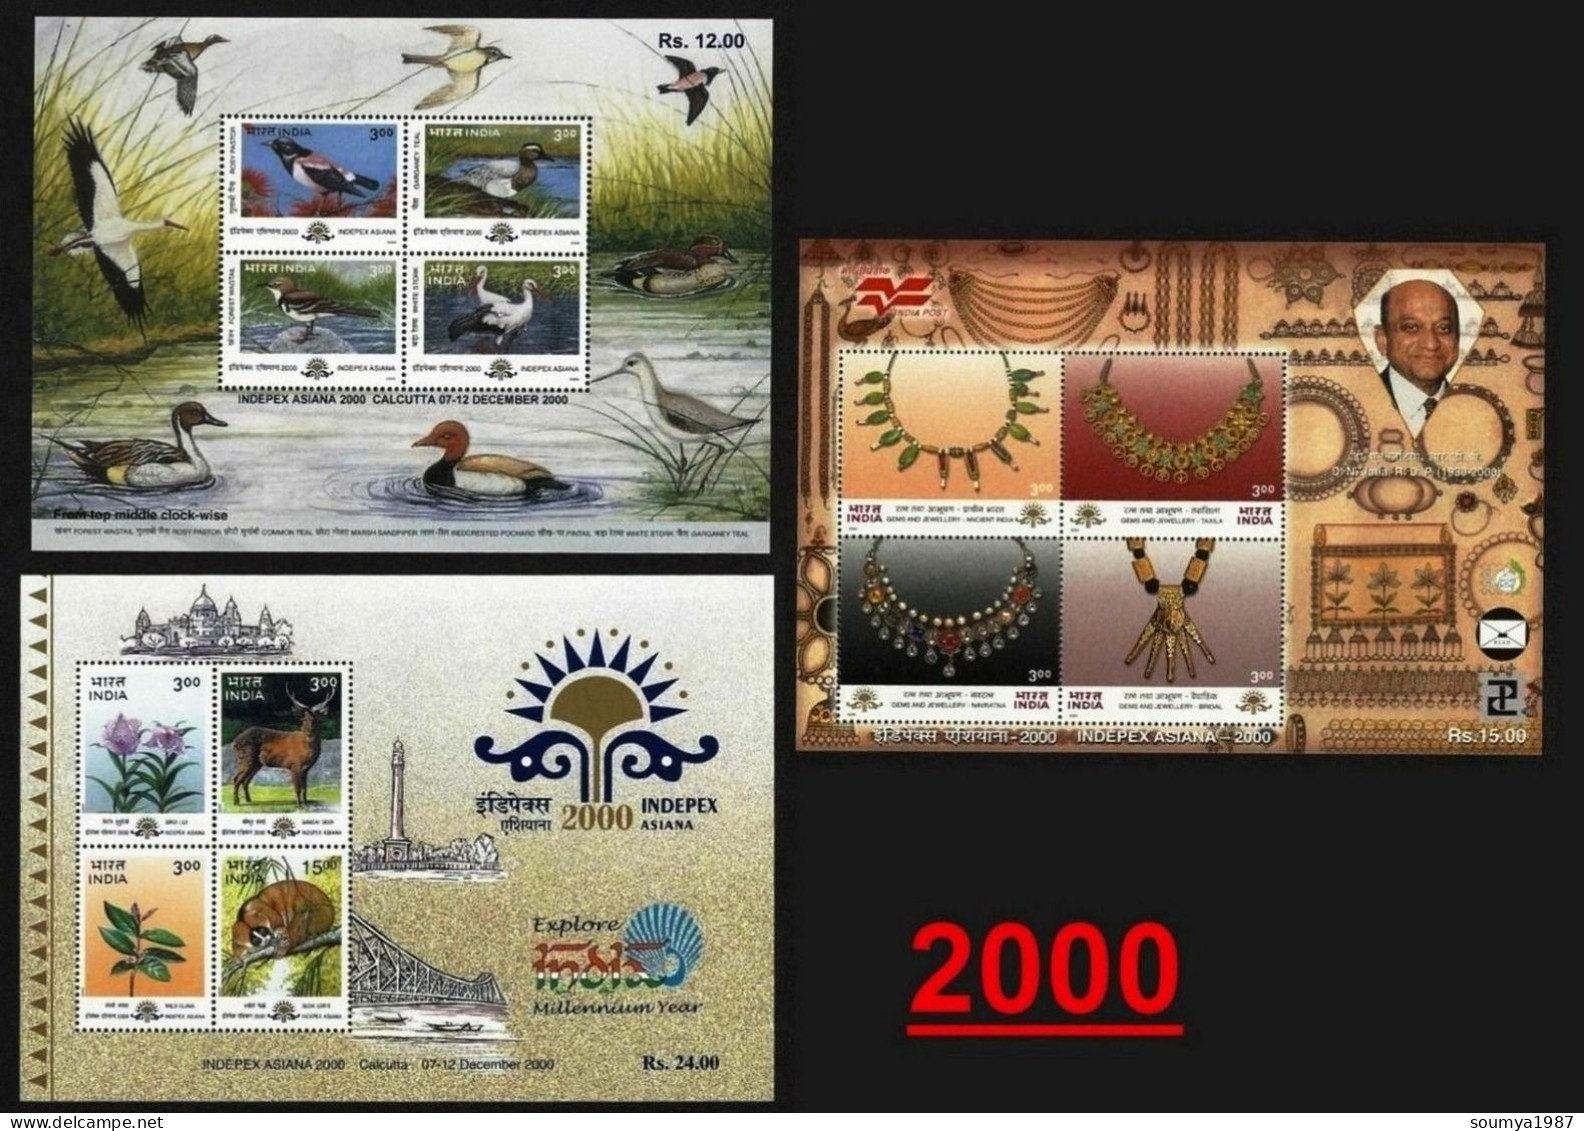 INDIA 2000 COMPLETE YEAR PACK OF MINIATURE SHEETS CONTAINS 3 MS OF FLOWERS, ANIMALS, BIRDS, JUALARY, INDIPEX MS MNH - Ungebraucht